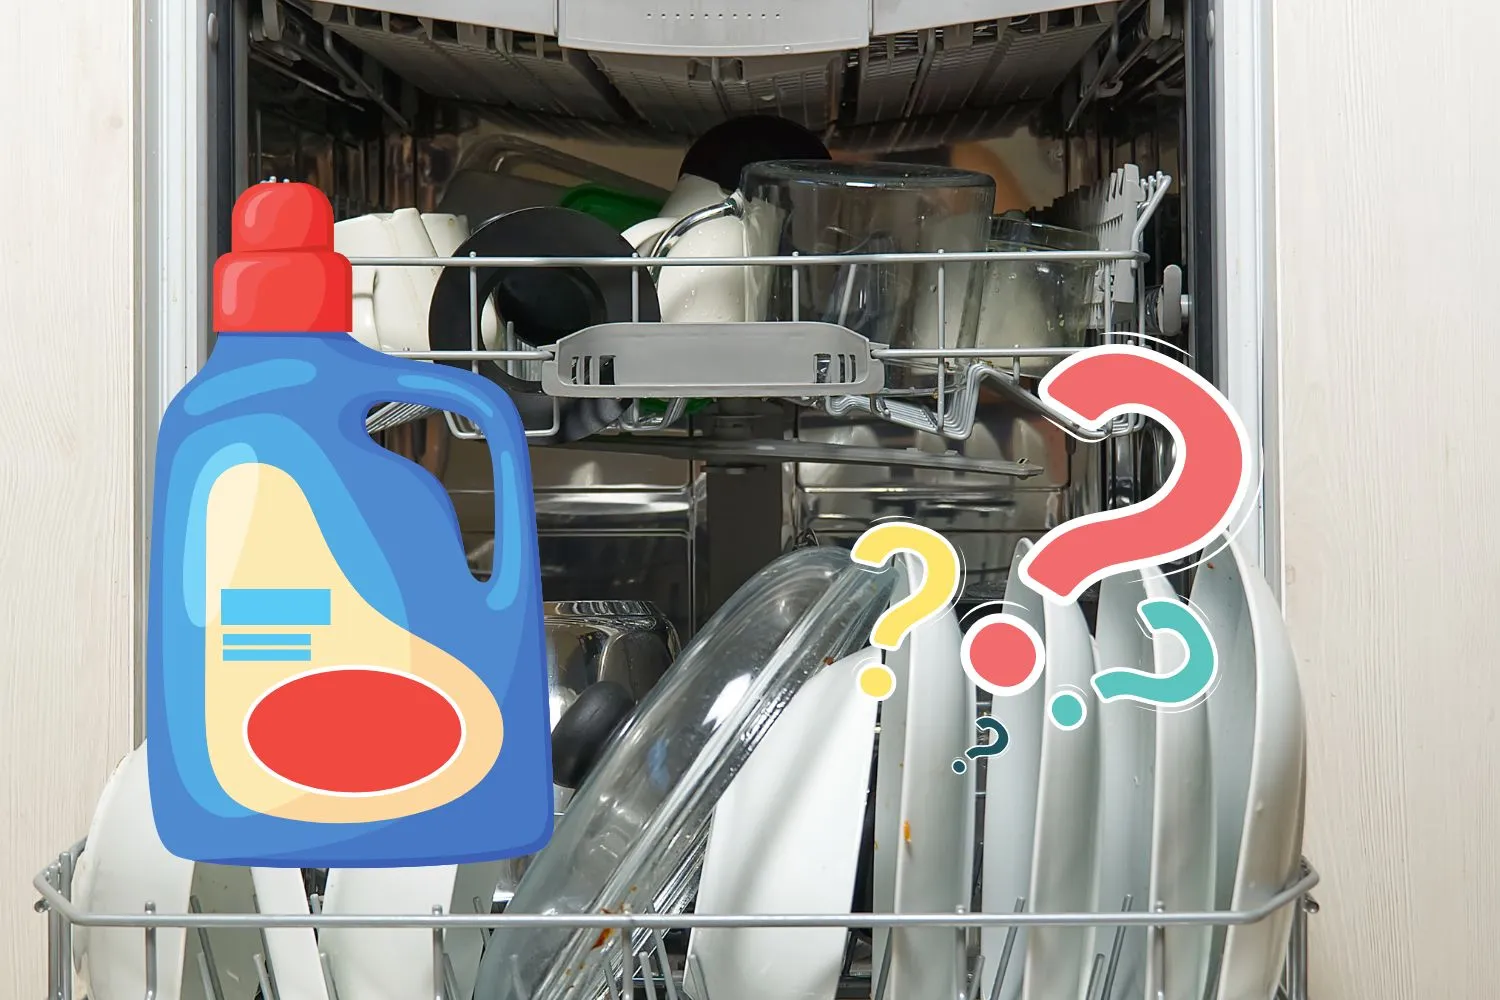 Can You Use Laundry Detergent To Wash Dishes?